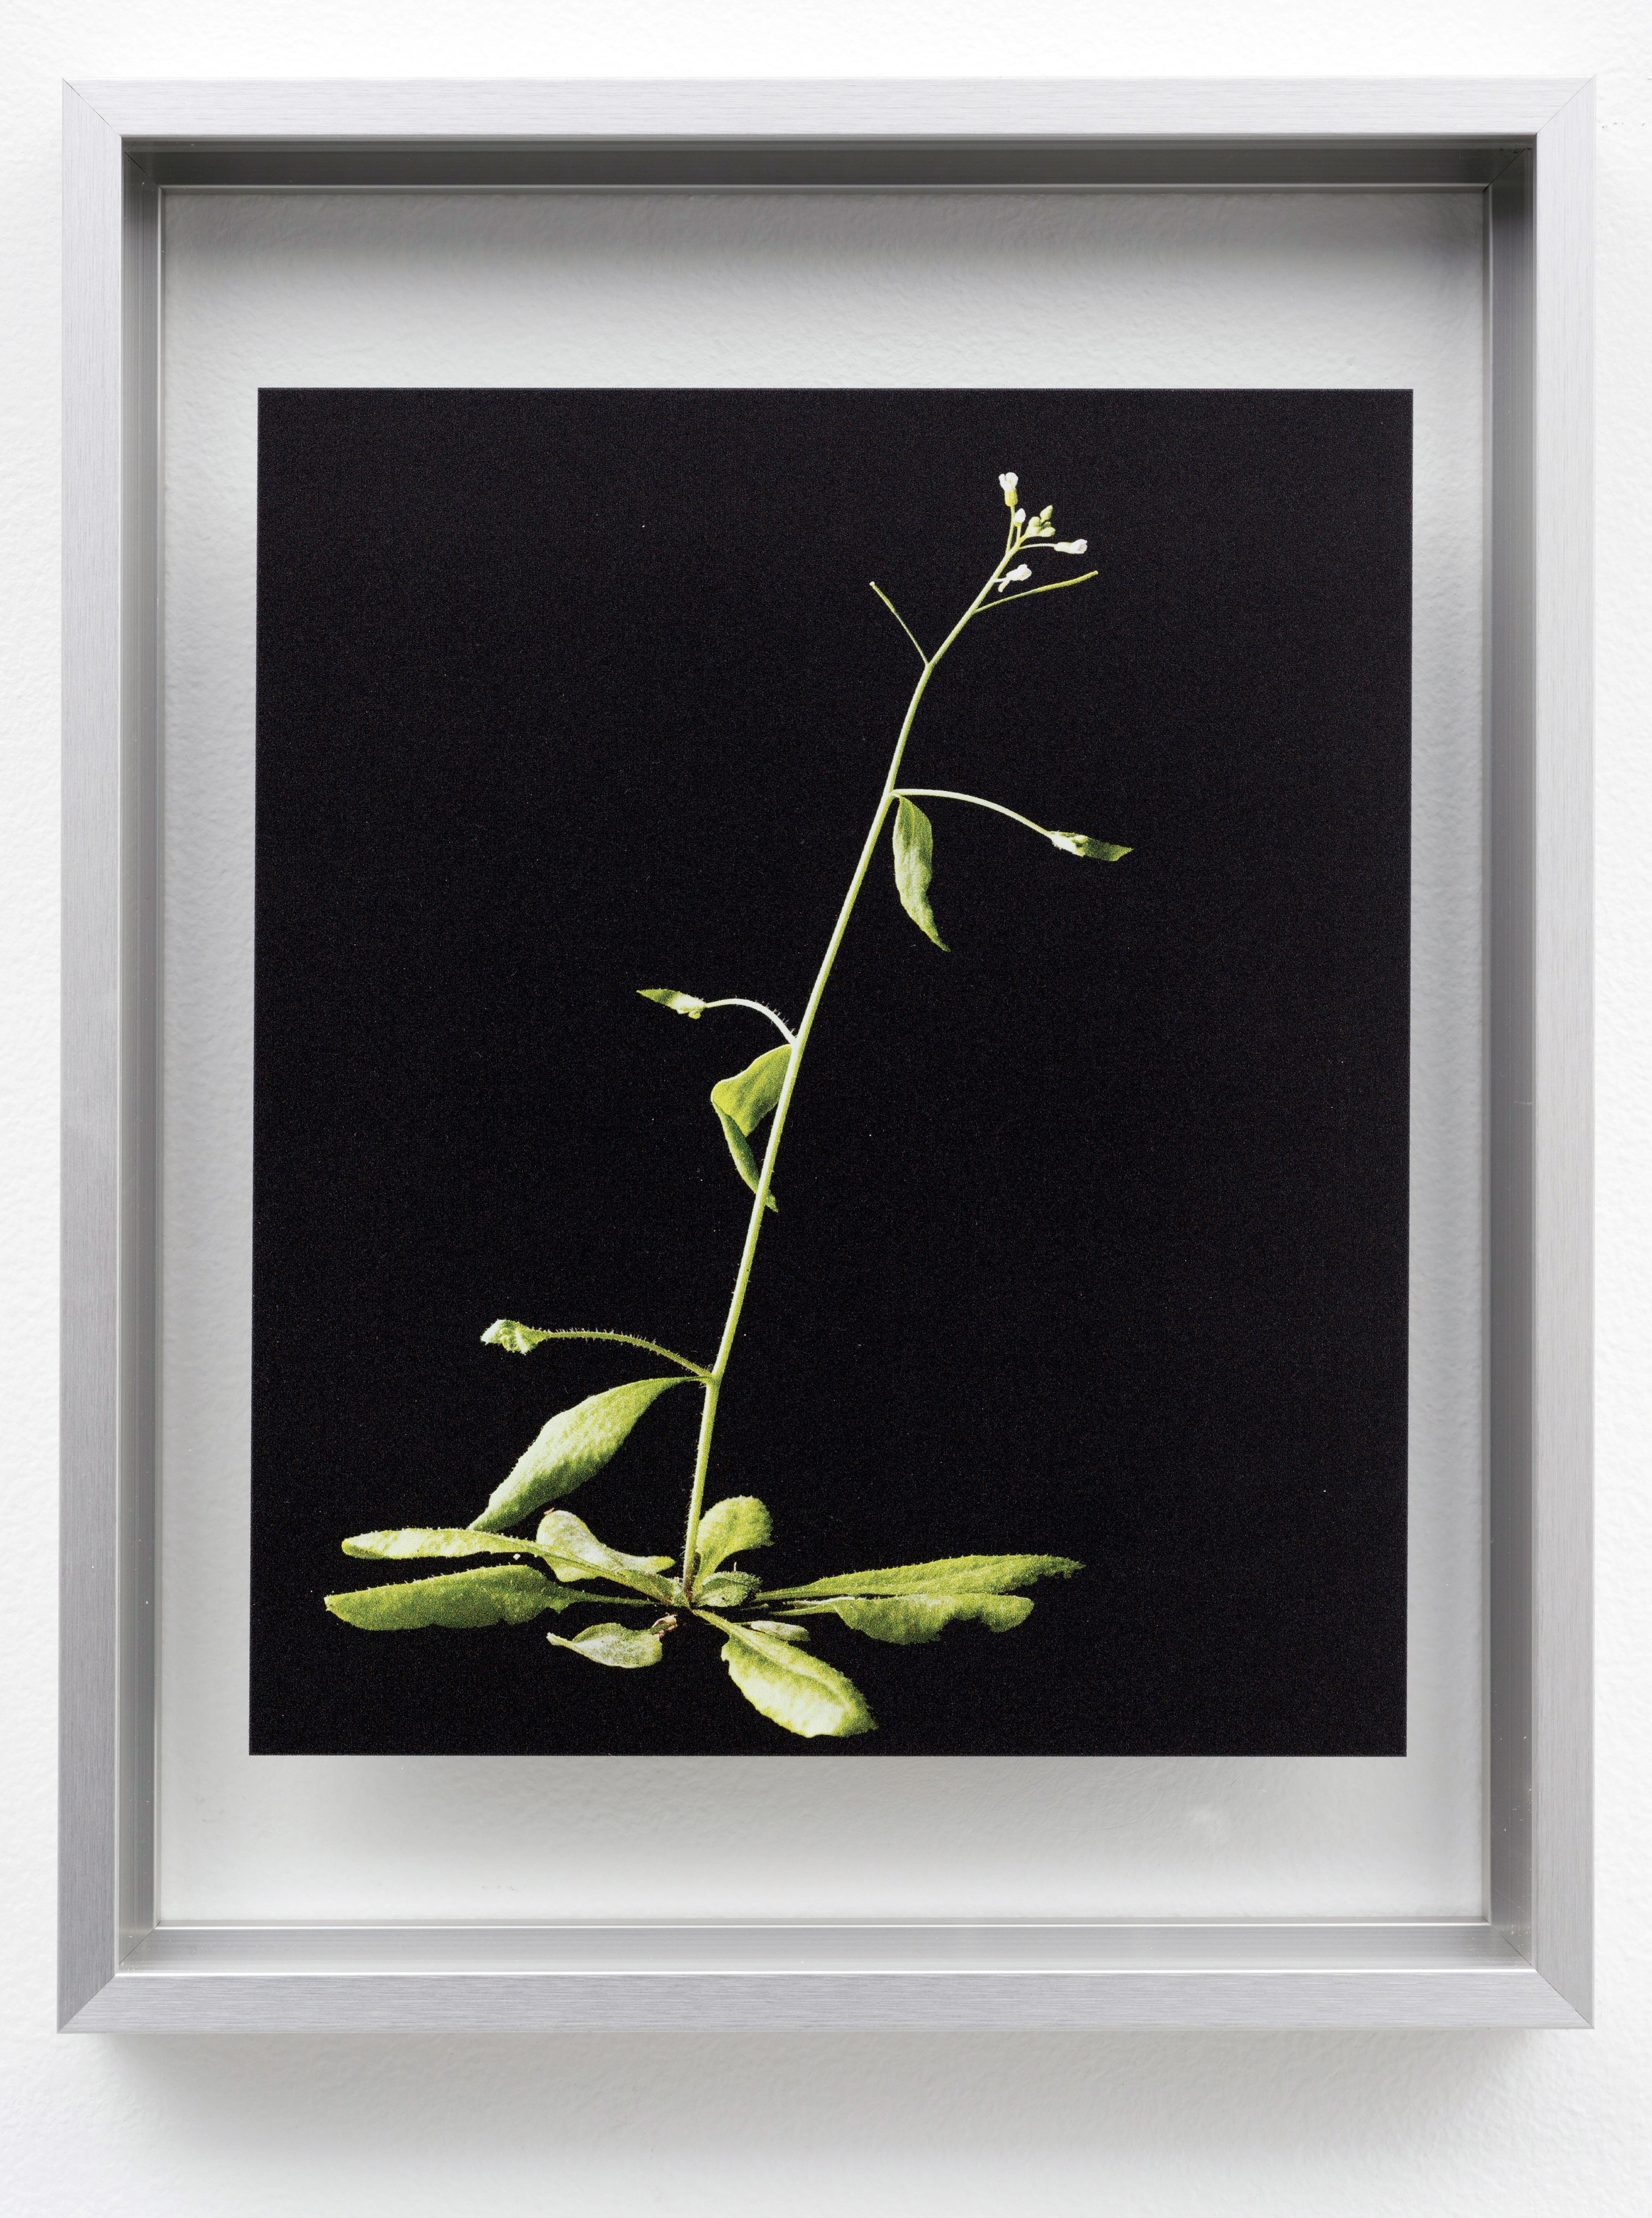  Rockcress (Arabidopsis) from the to Threptikon series, 2014. Courtesy of the Arabidopsis Biological Center&nbsp; 